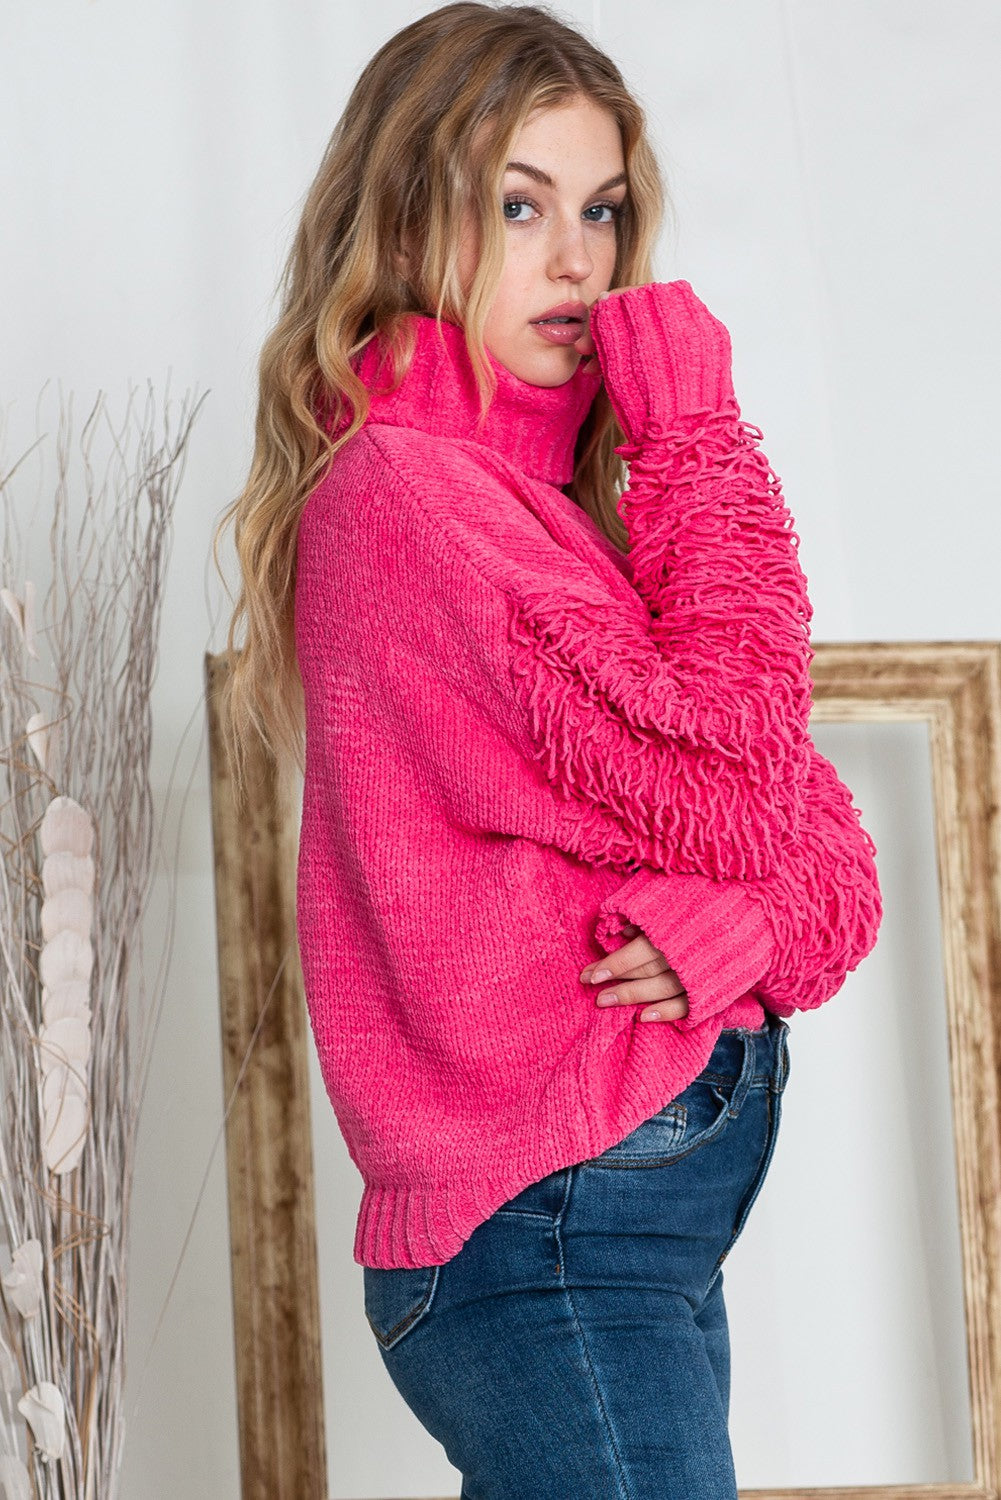 Sweater, Turtleneck, Fuzzy Sleeve, Pink, Regular and Plus if